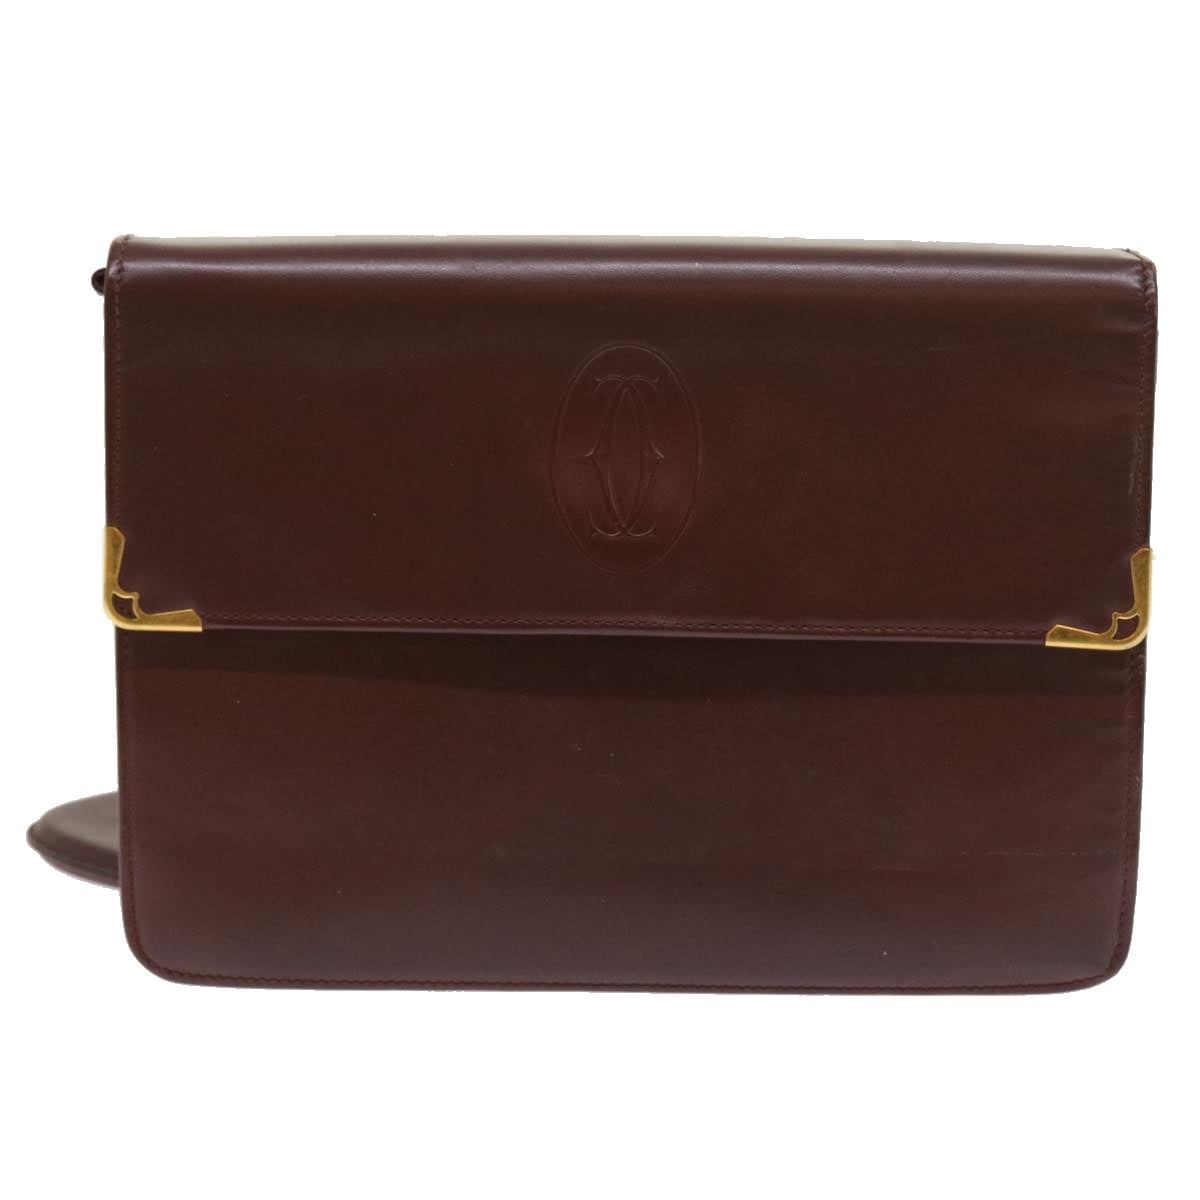 CARTIER Clutch Bag Leather Wine Red Auth 55608